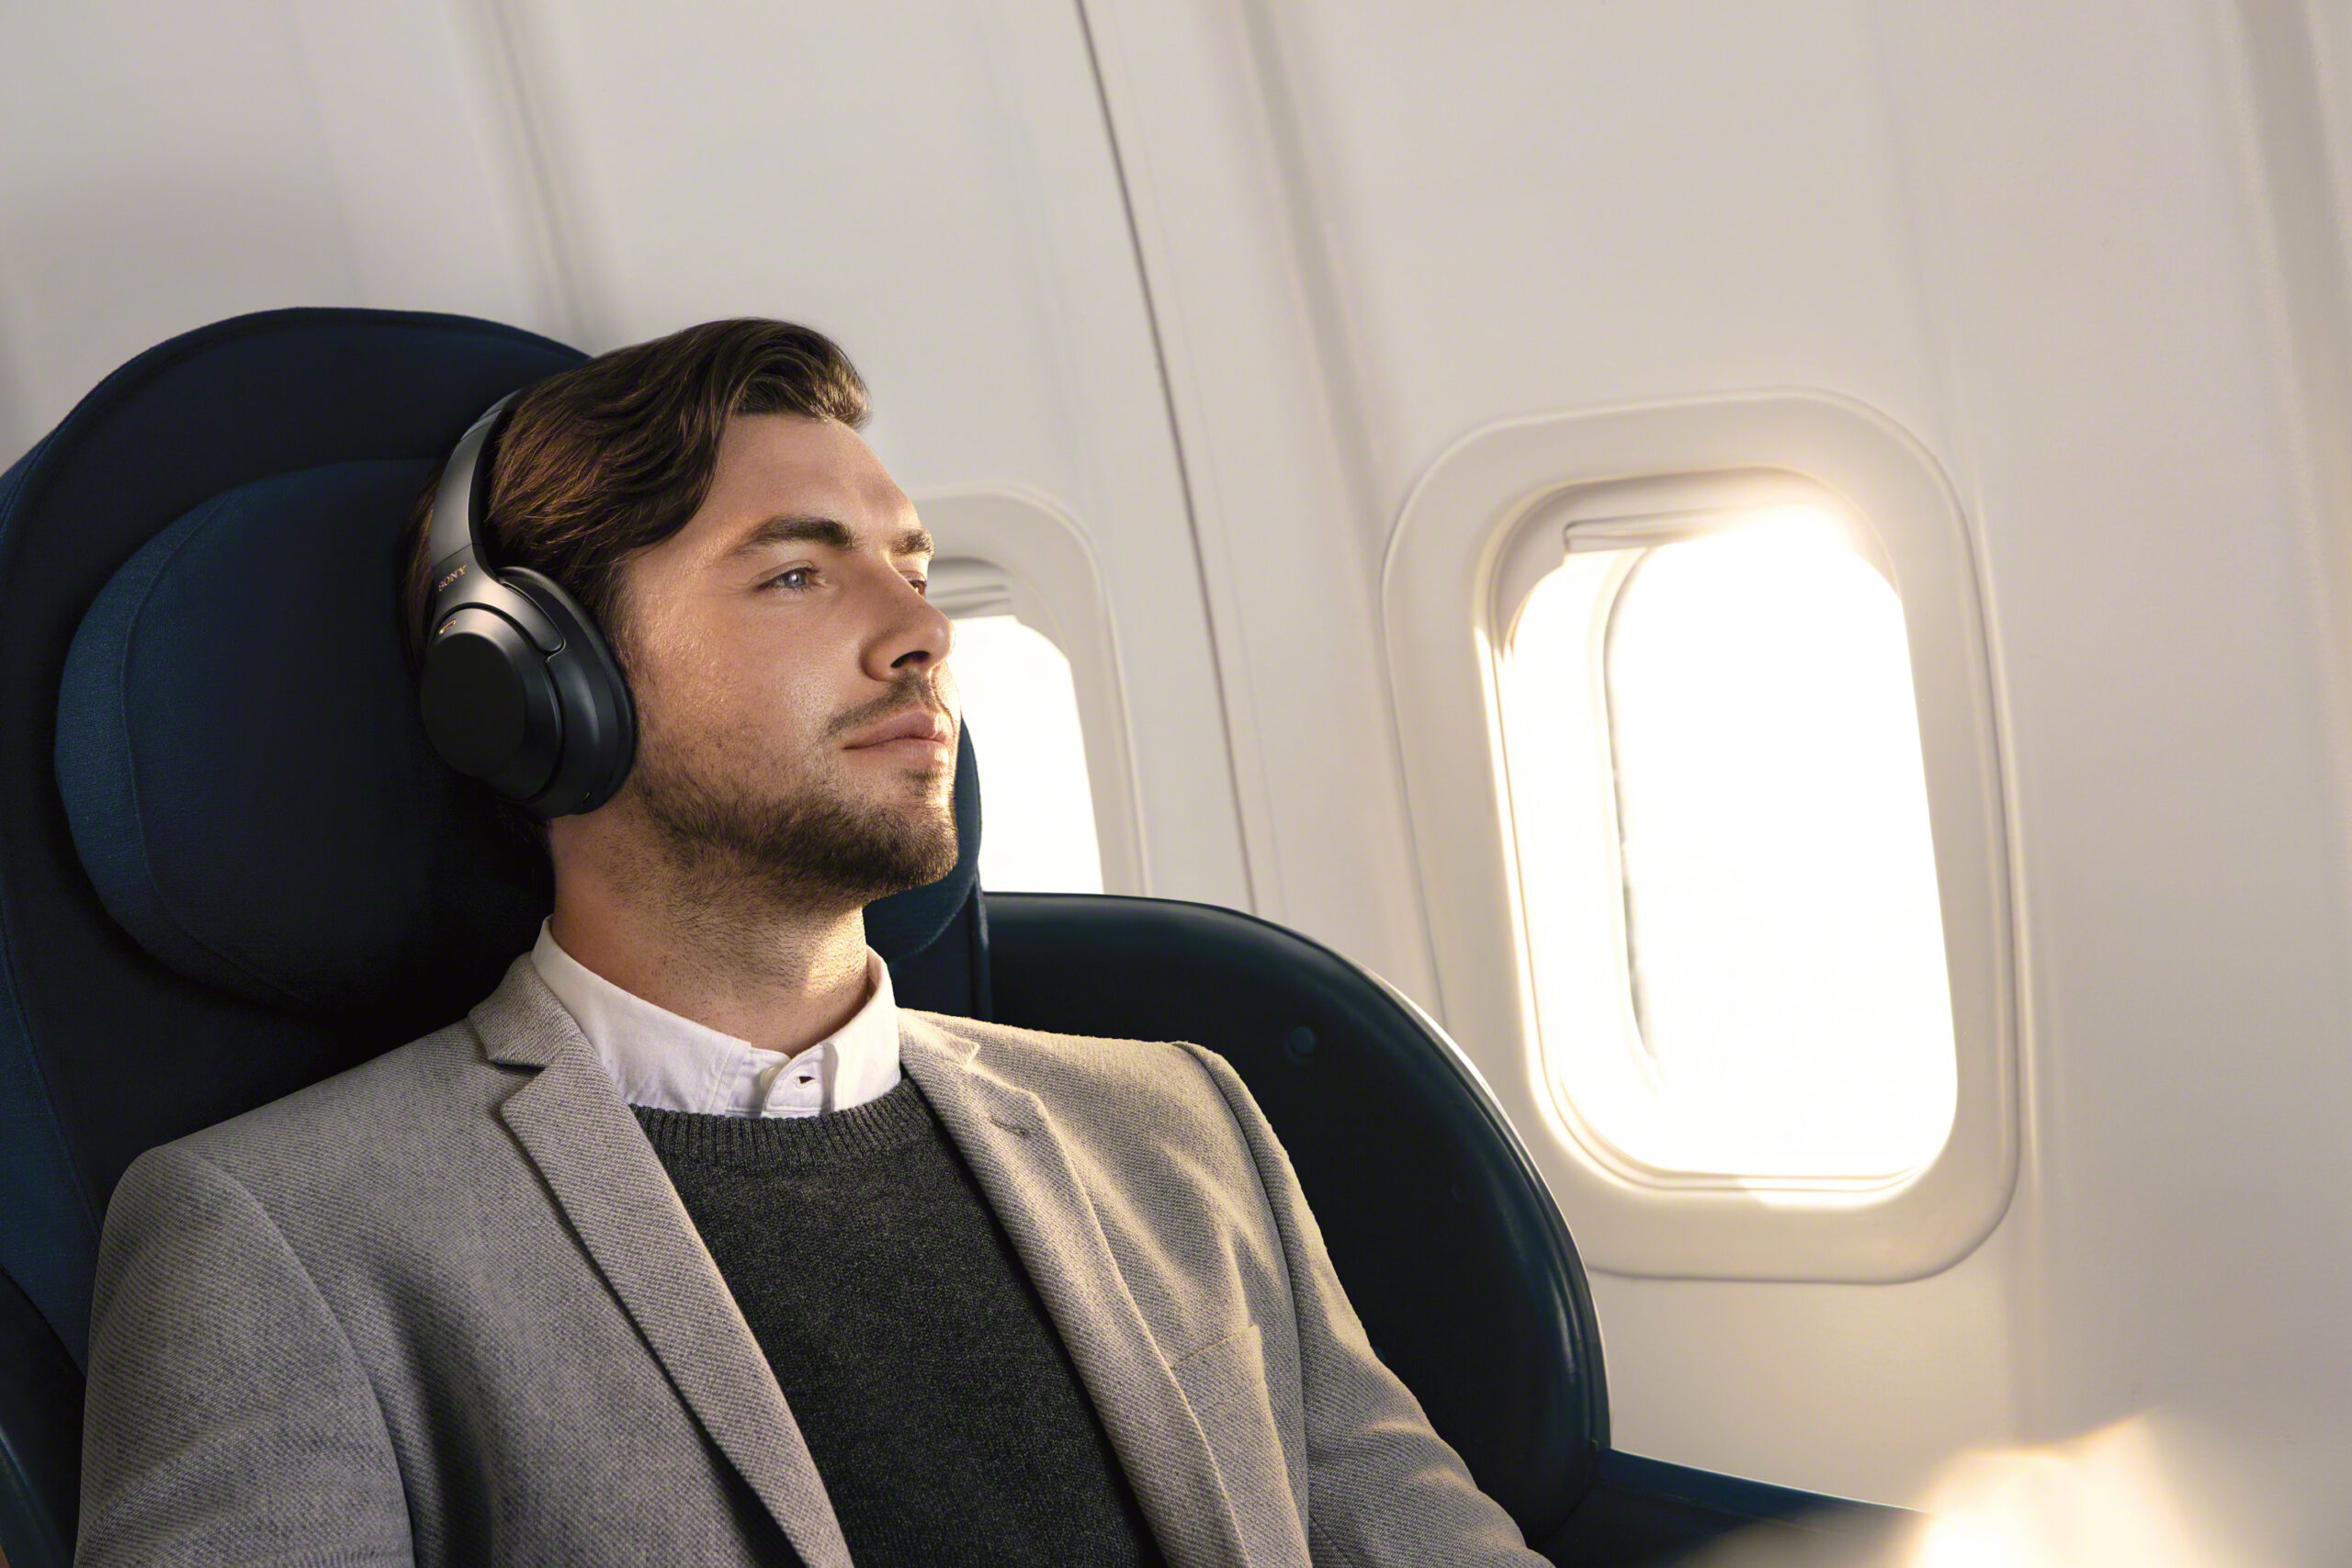 Sony press image of the Sony WH-1000XM3 active noise-cancelling headphones. A man is wearing them in a plane.